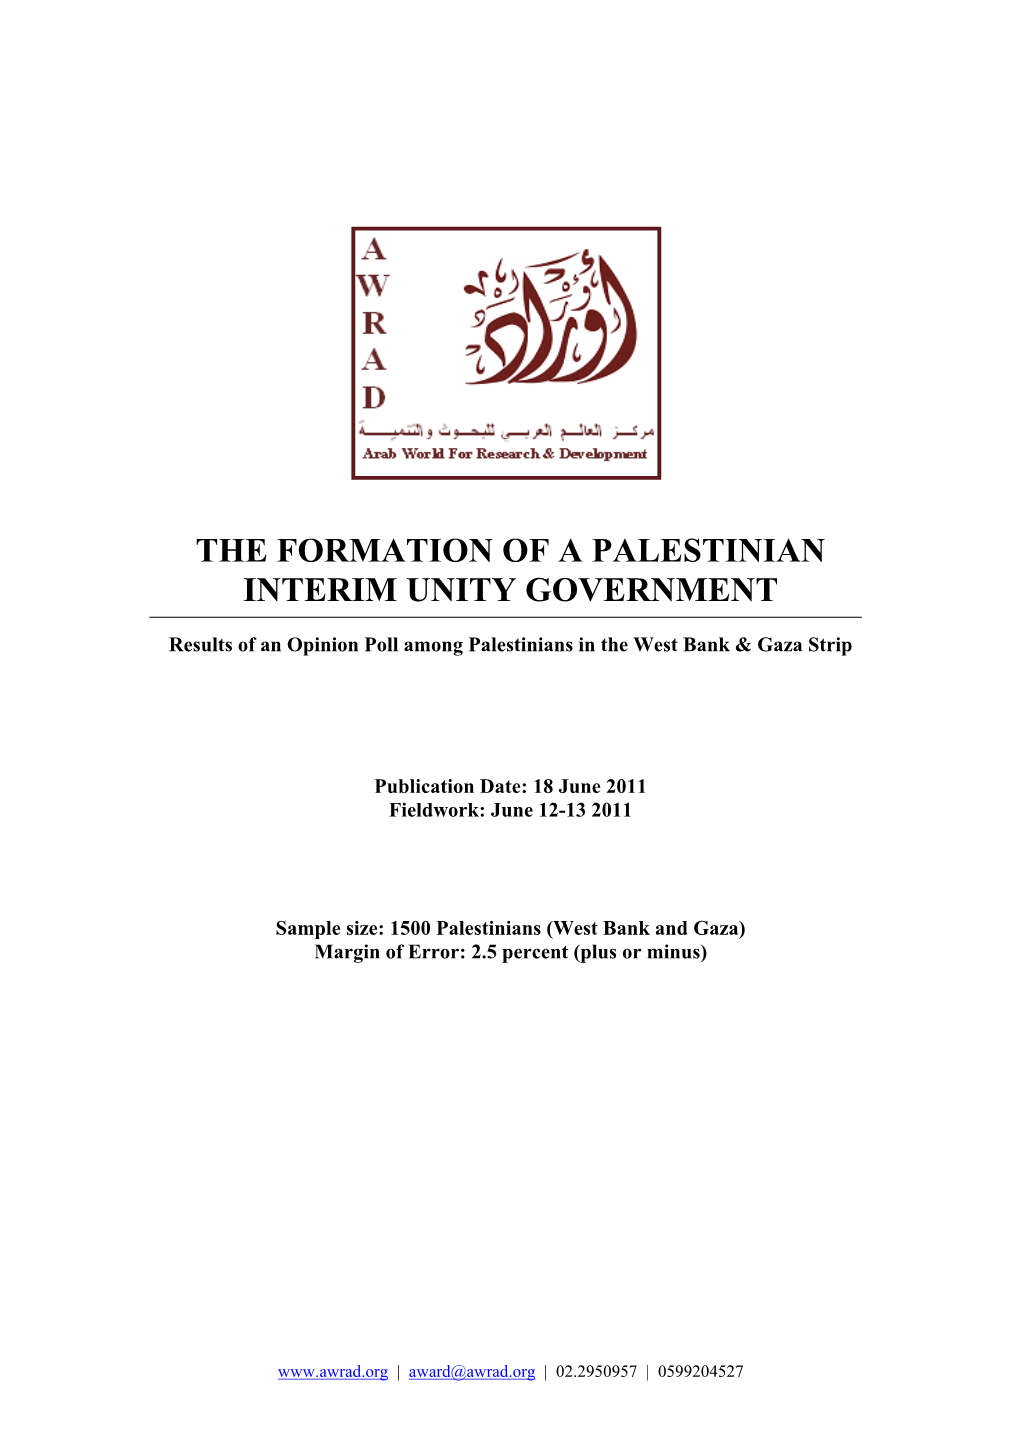 The Formation of a Palestinian Interim Unity Government